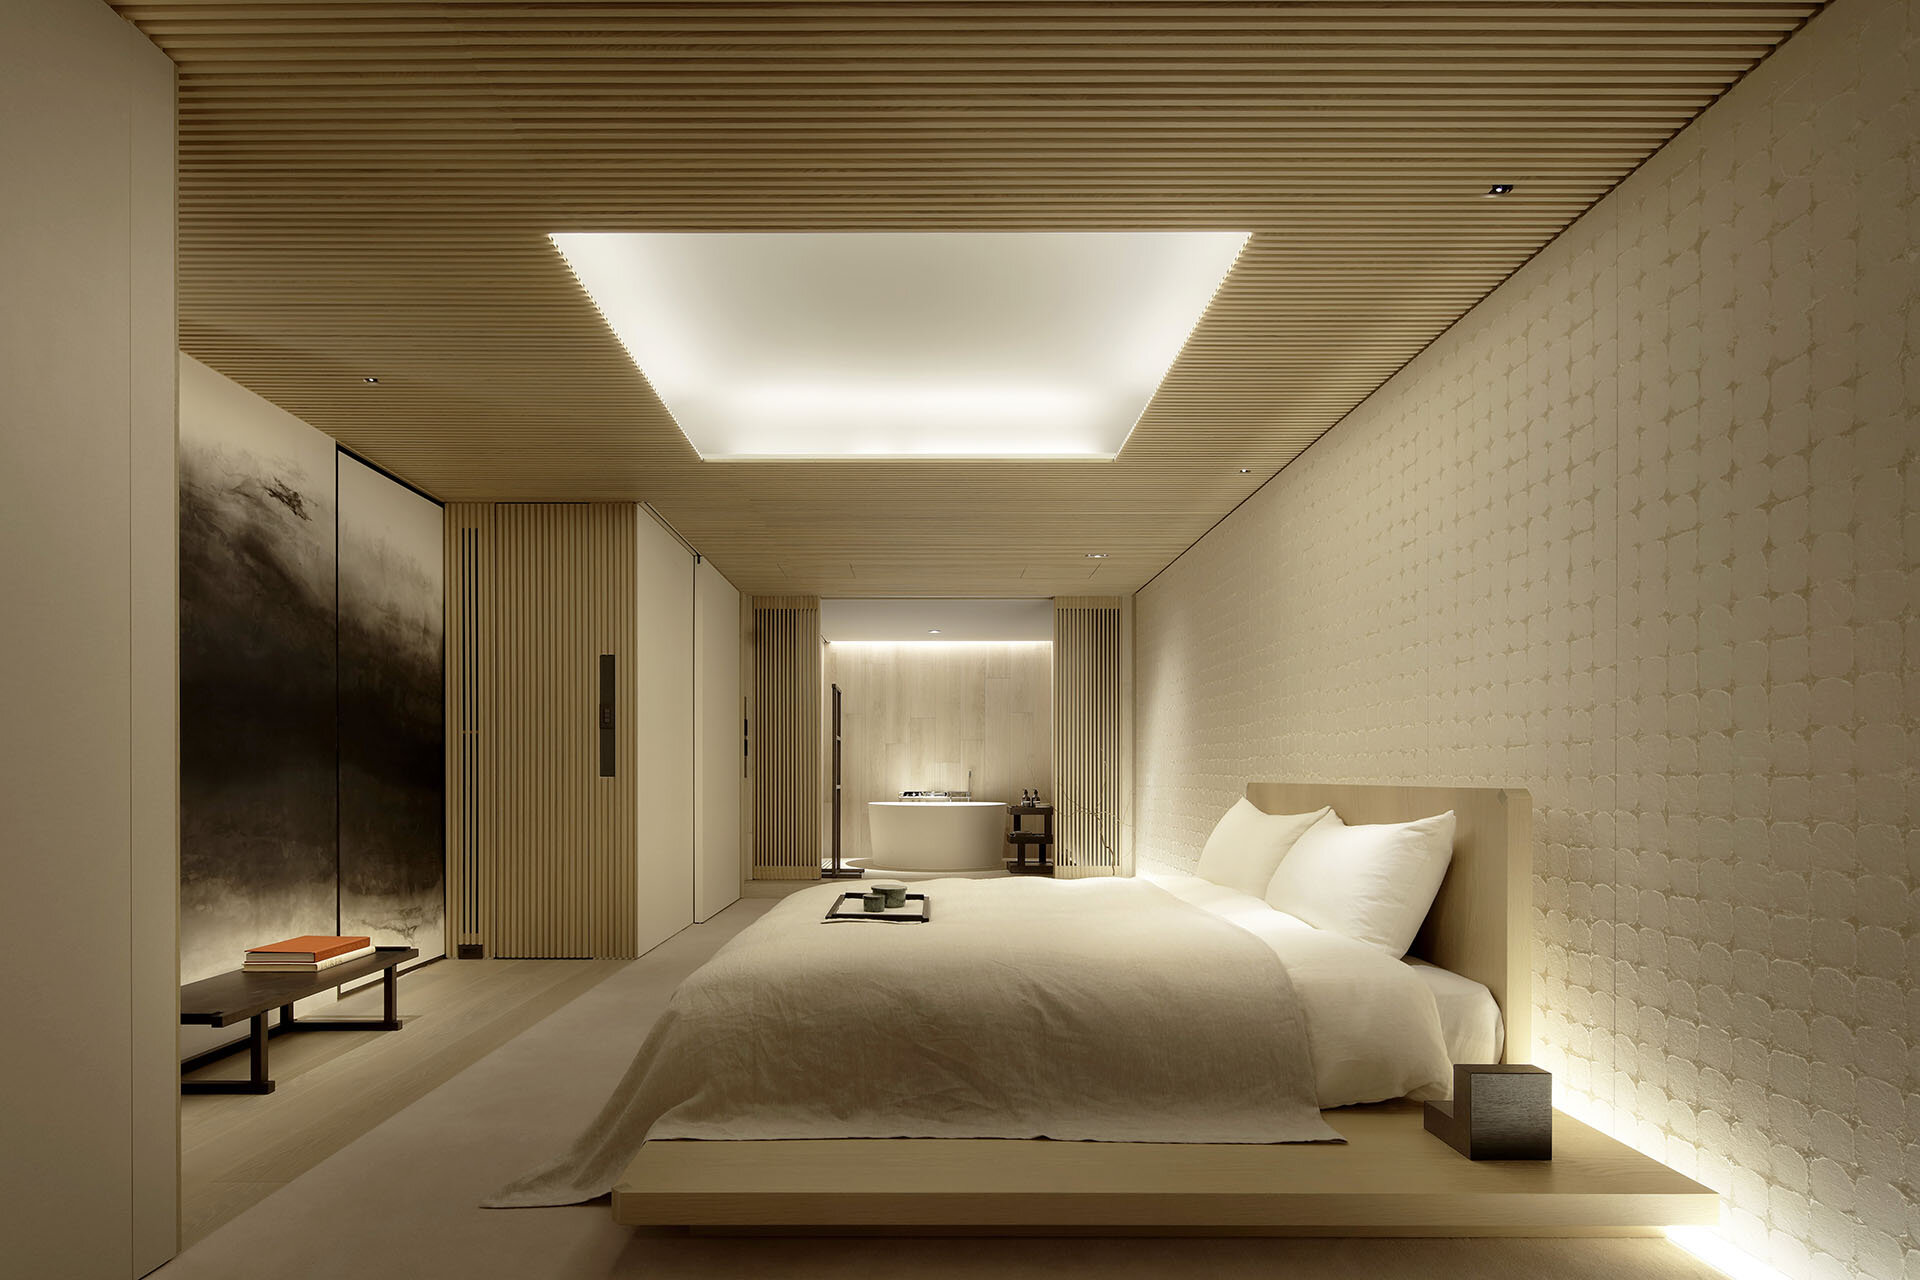 The Master bedroom